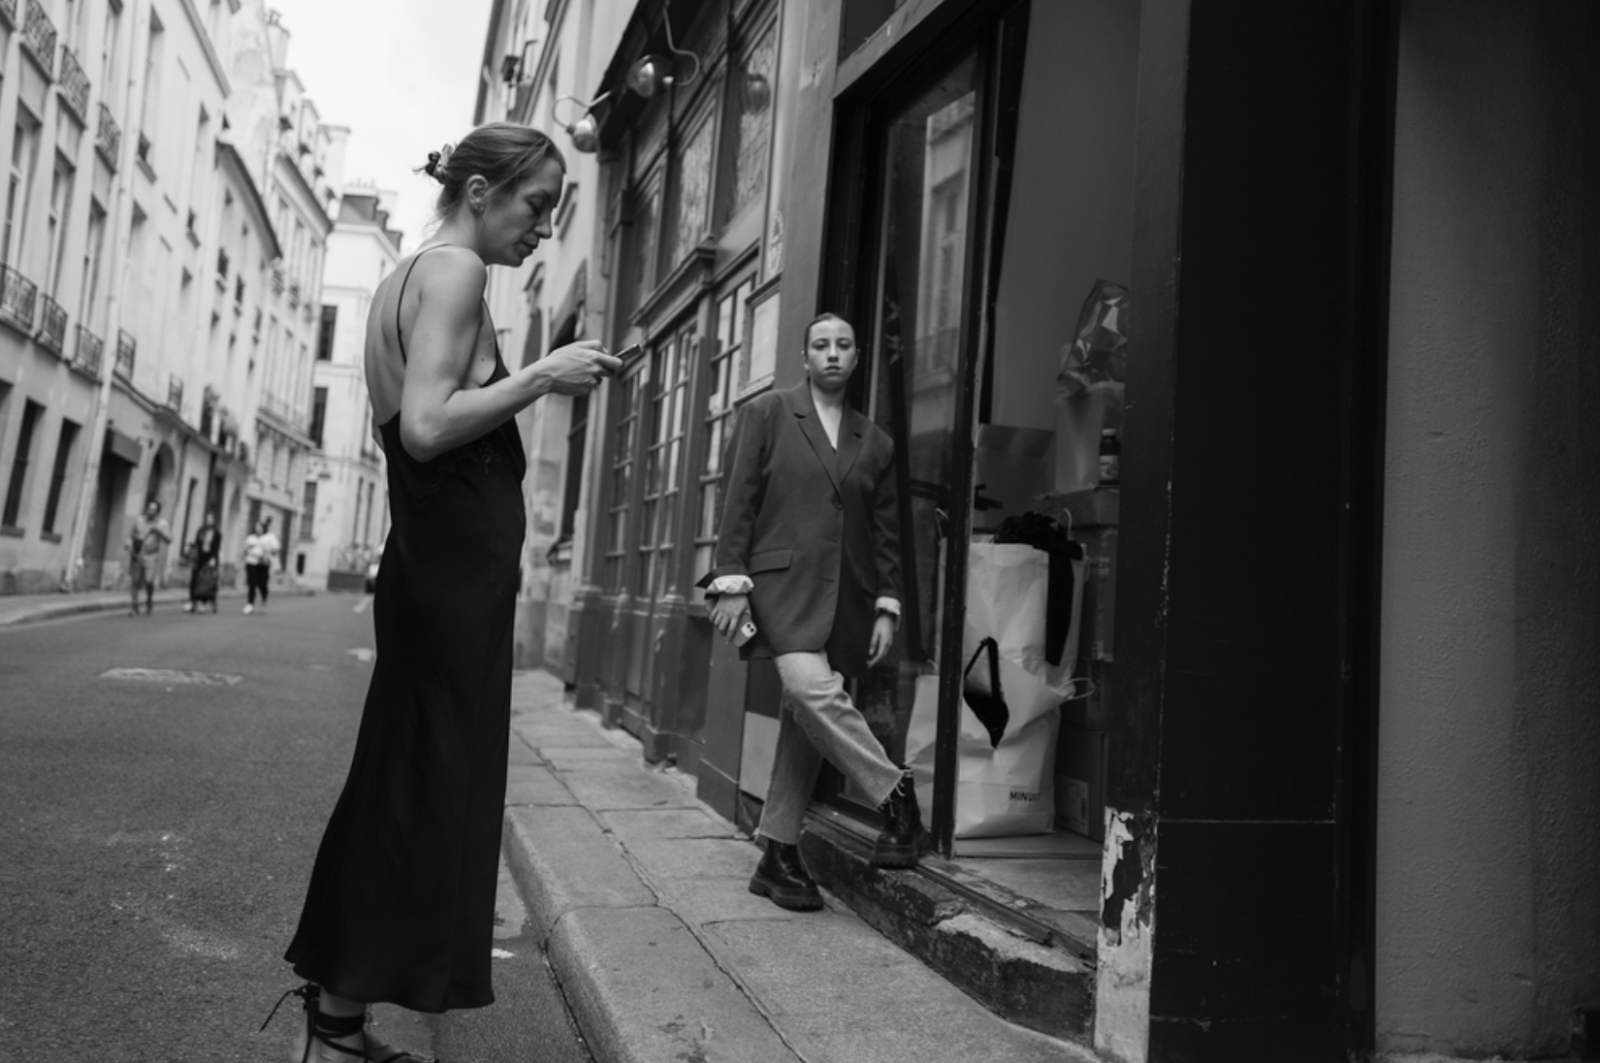 Black and white photograph of two women standing in the streets of France, one wearing a black slip dress looking at her phone, the other standing off to the side with a dark blazer coat and slacks.